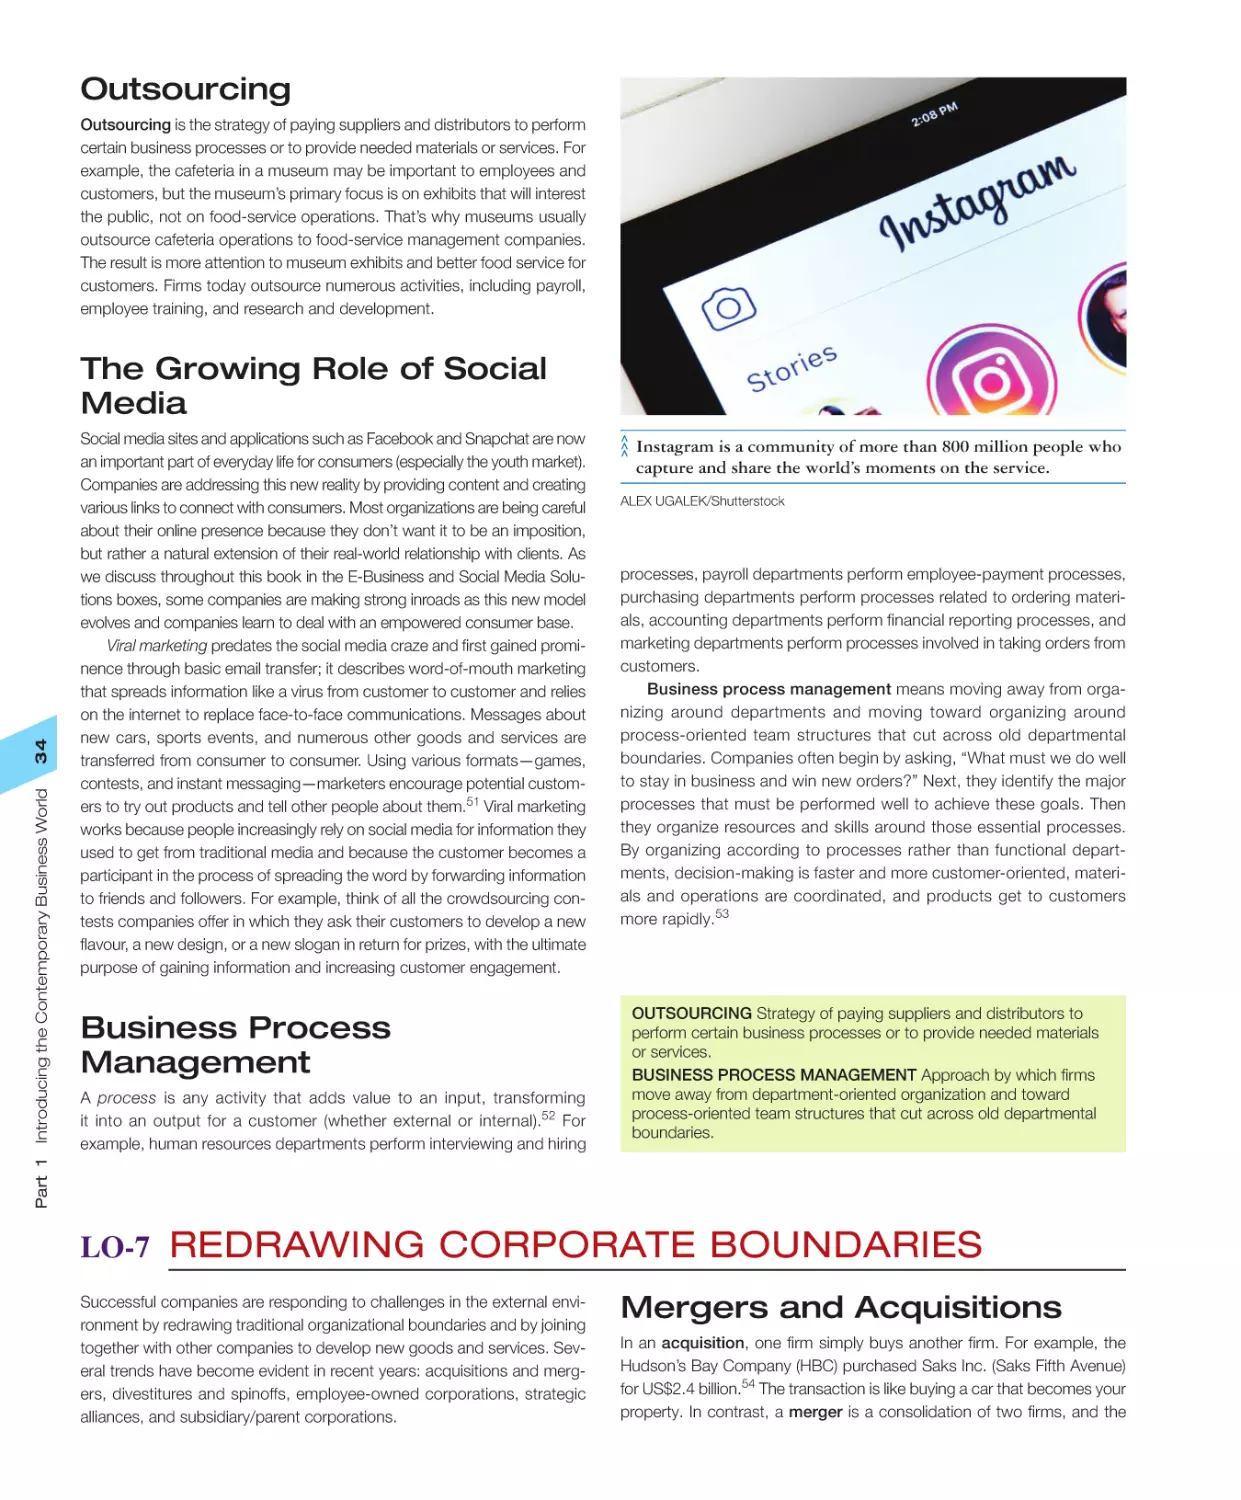 The Growing Role of Social Media
Business Process Management
LO‐7 Redrawing Corporate Boundaries